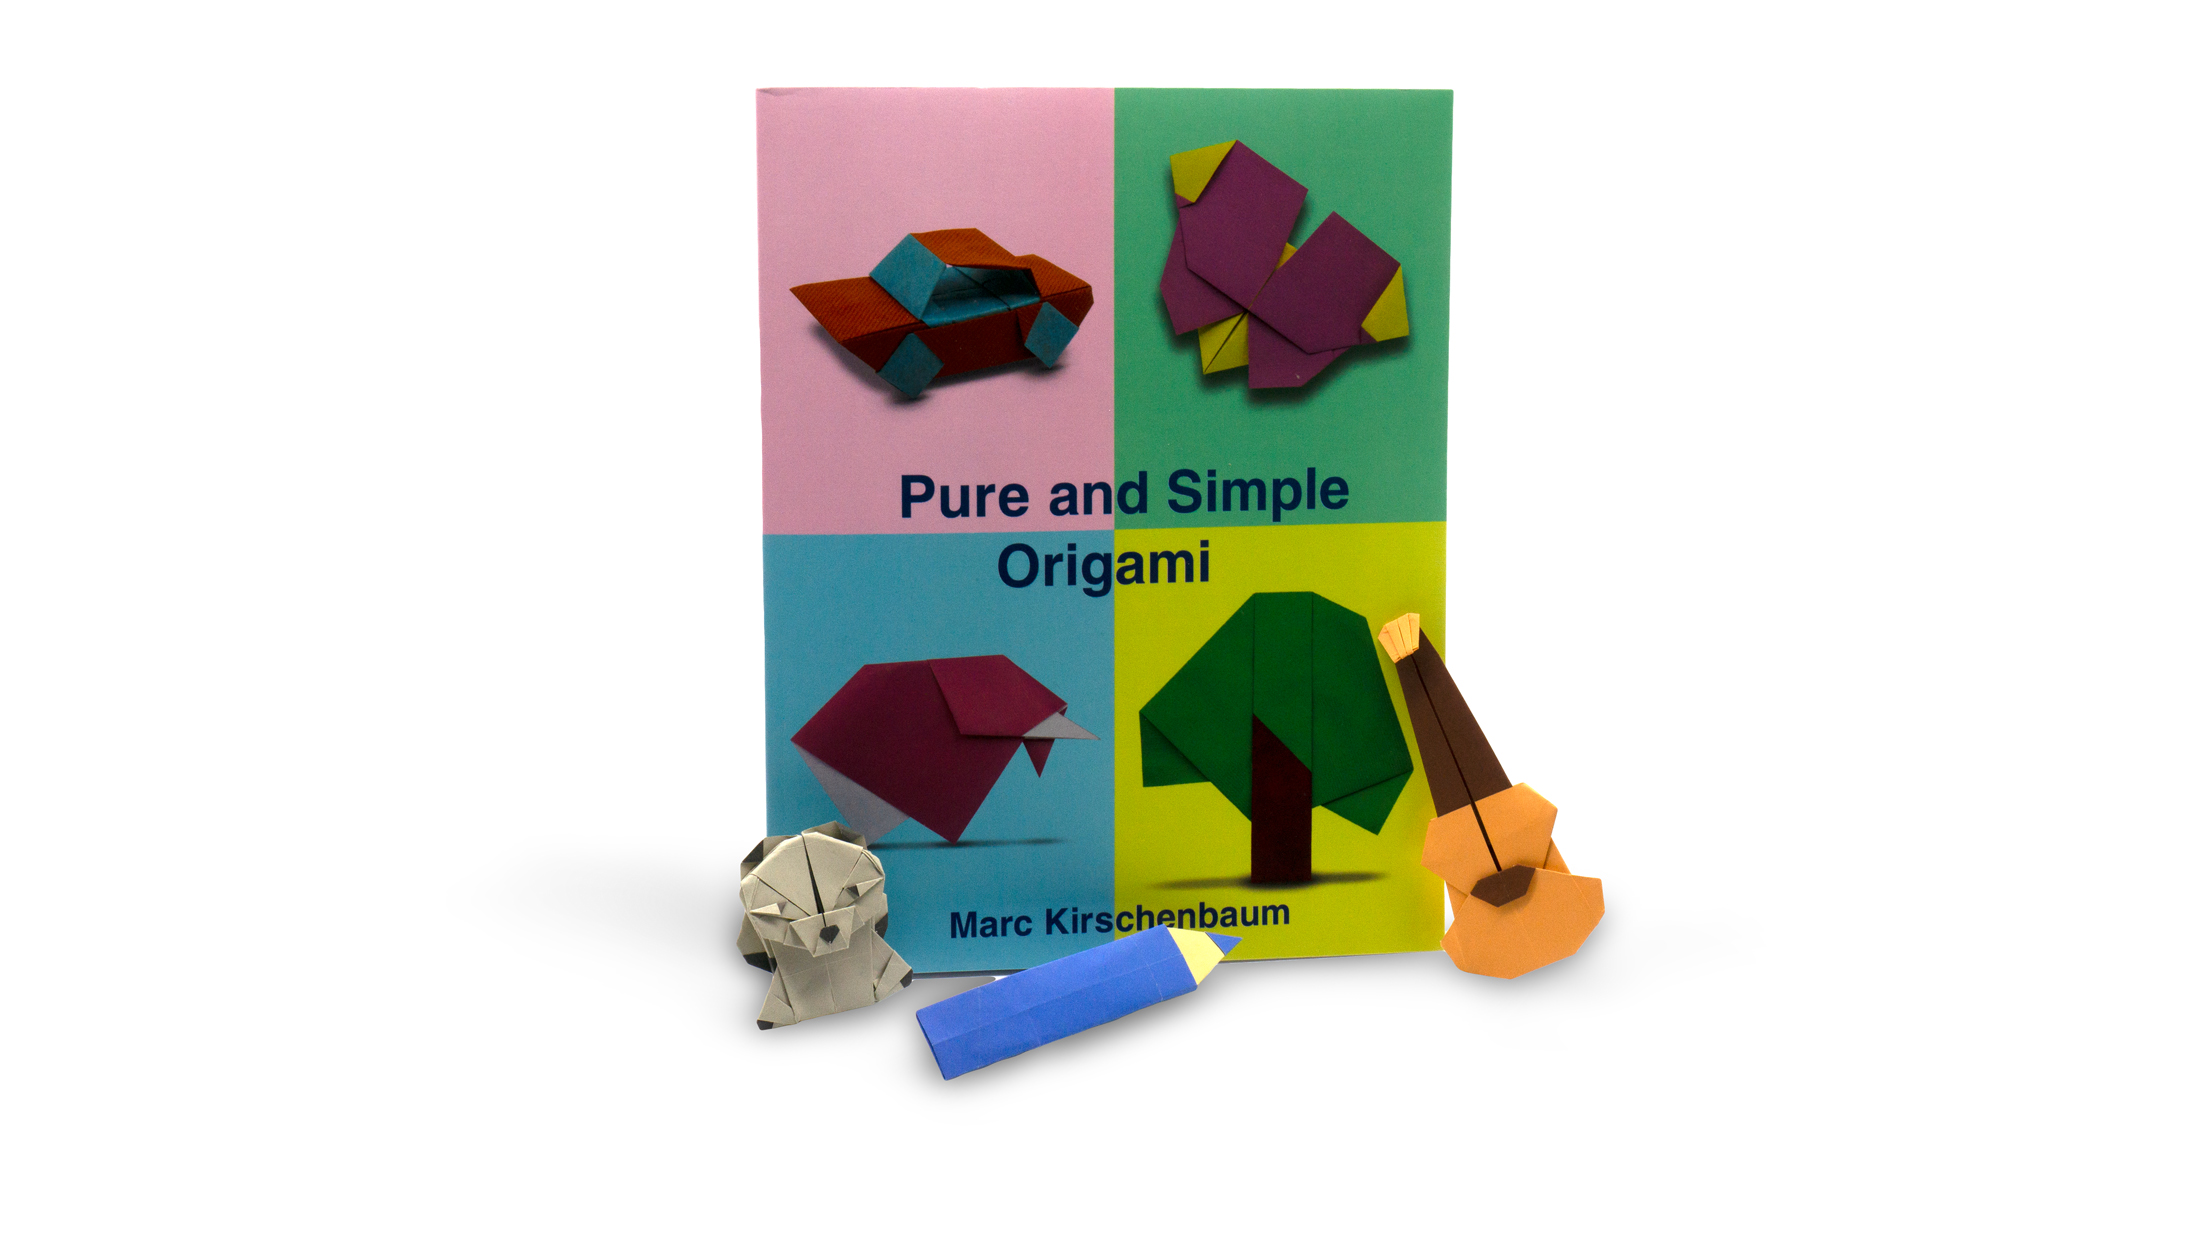 Pure and Simple Origami Book Review - Origami Expressions